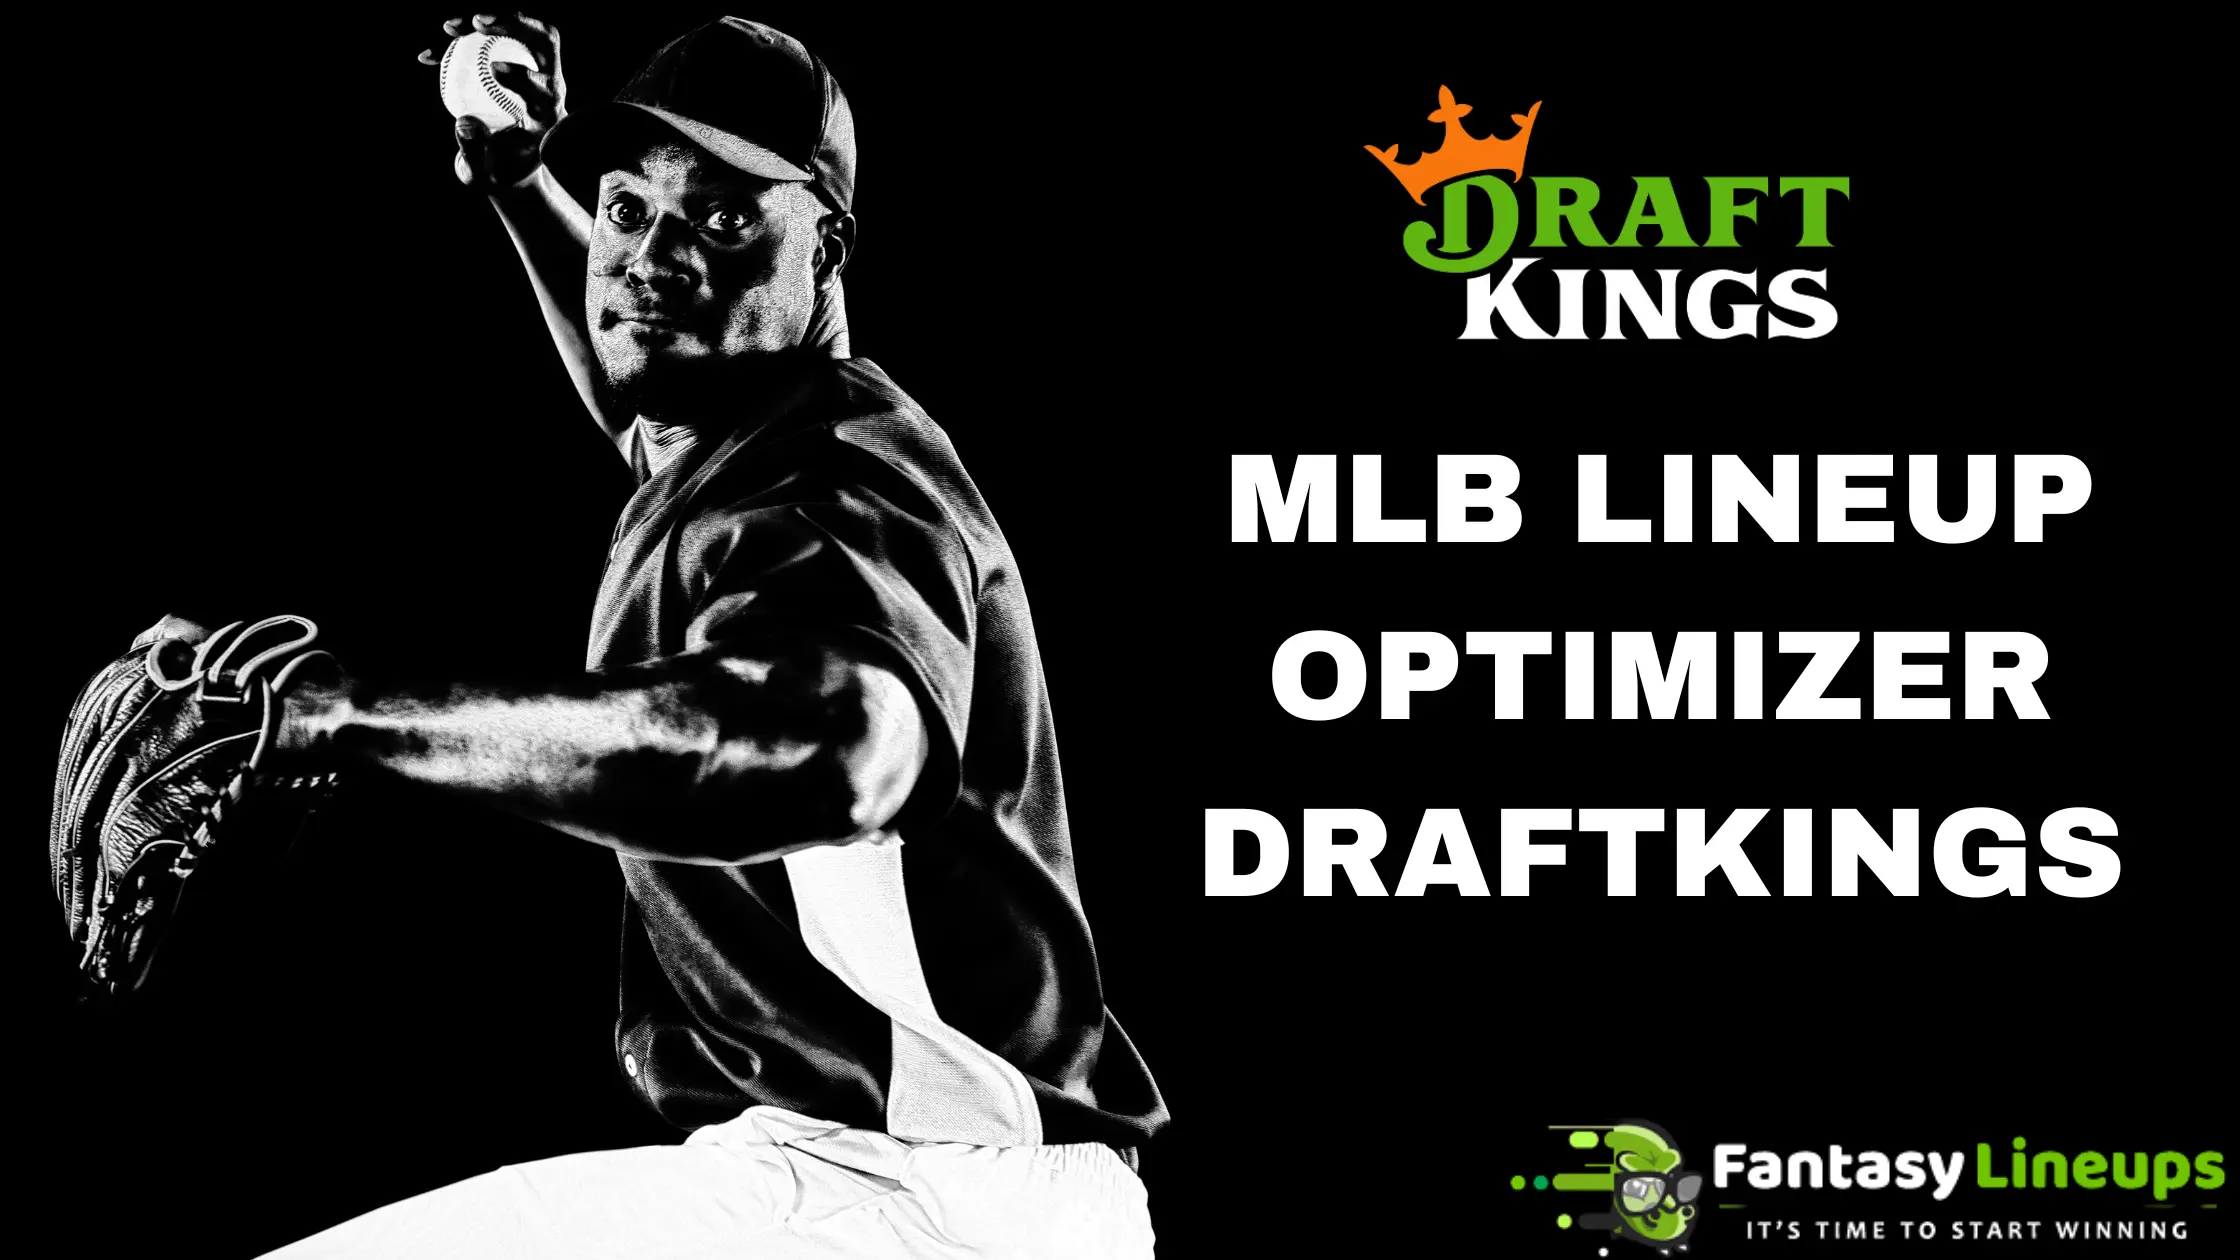 DraftKings MLB lineup optimizer: The power of a powerful tool